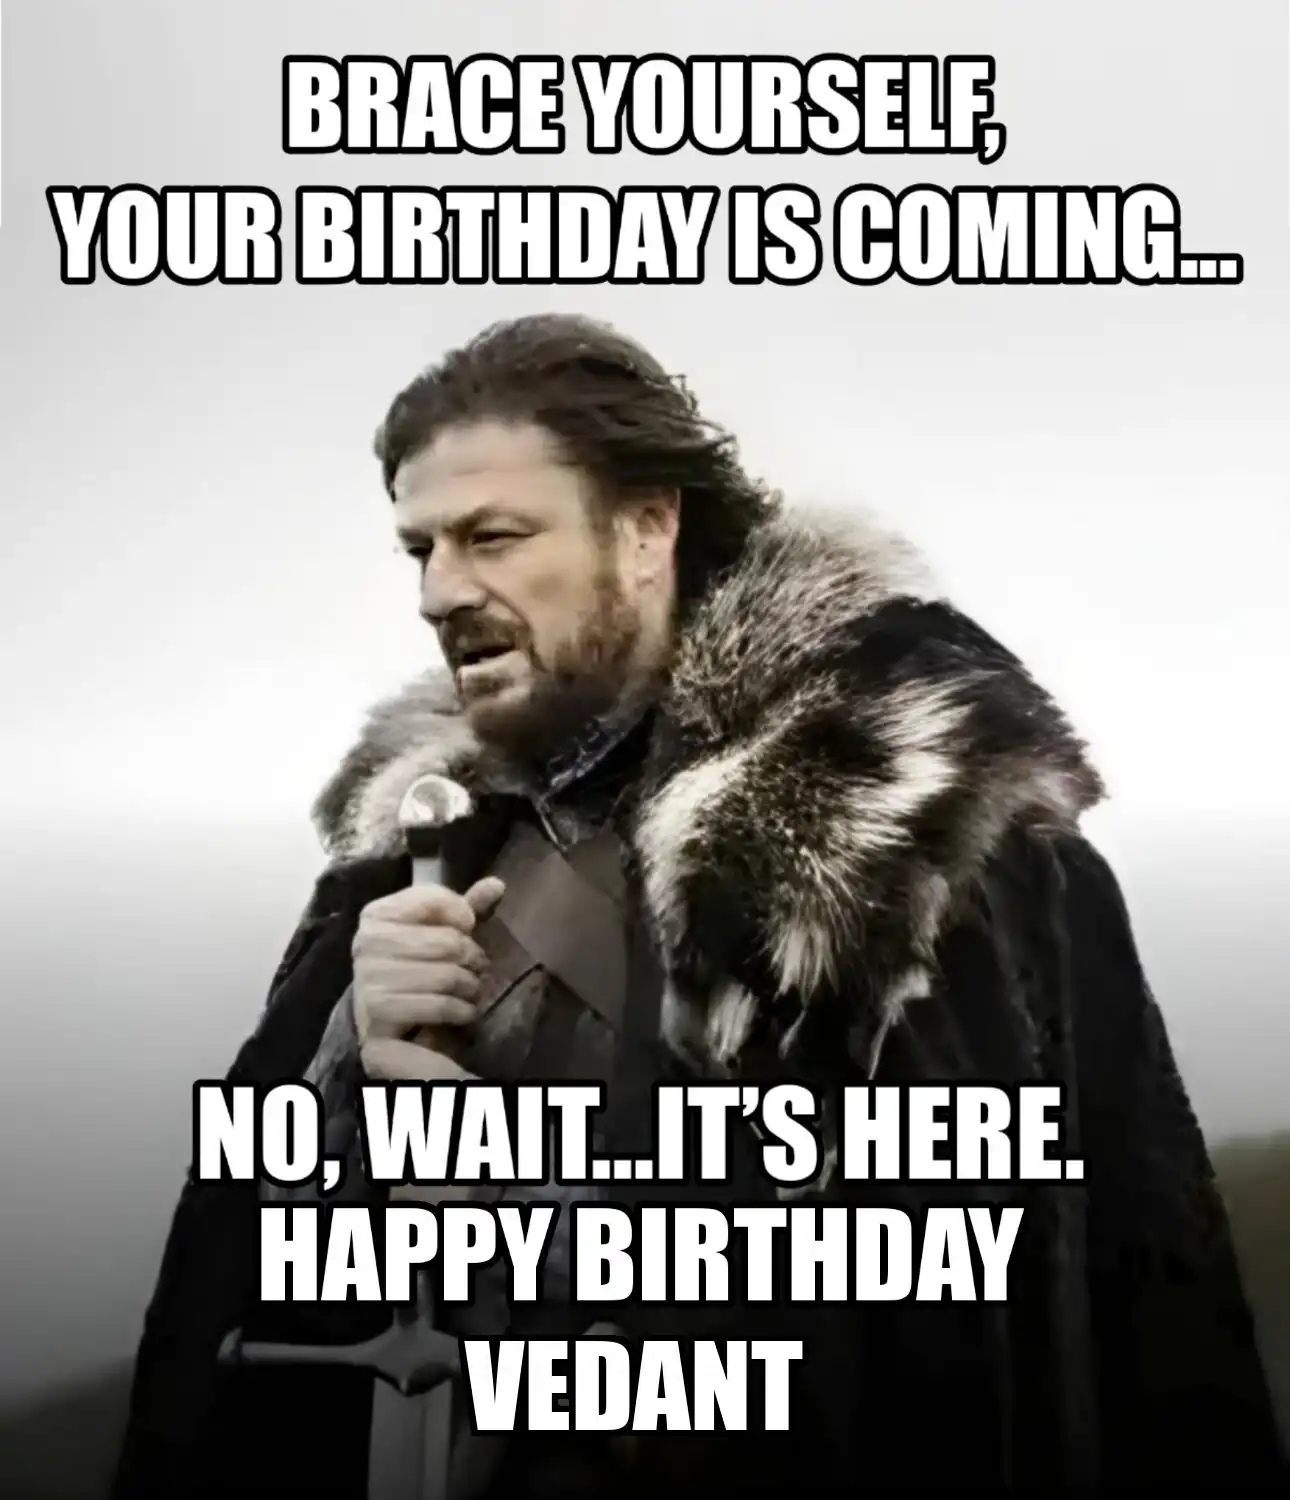 Happy Birthday Vedant Brace Yourself Your Birthday Is Coming Meme